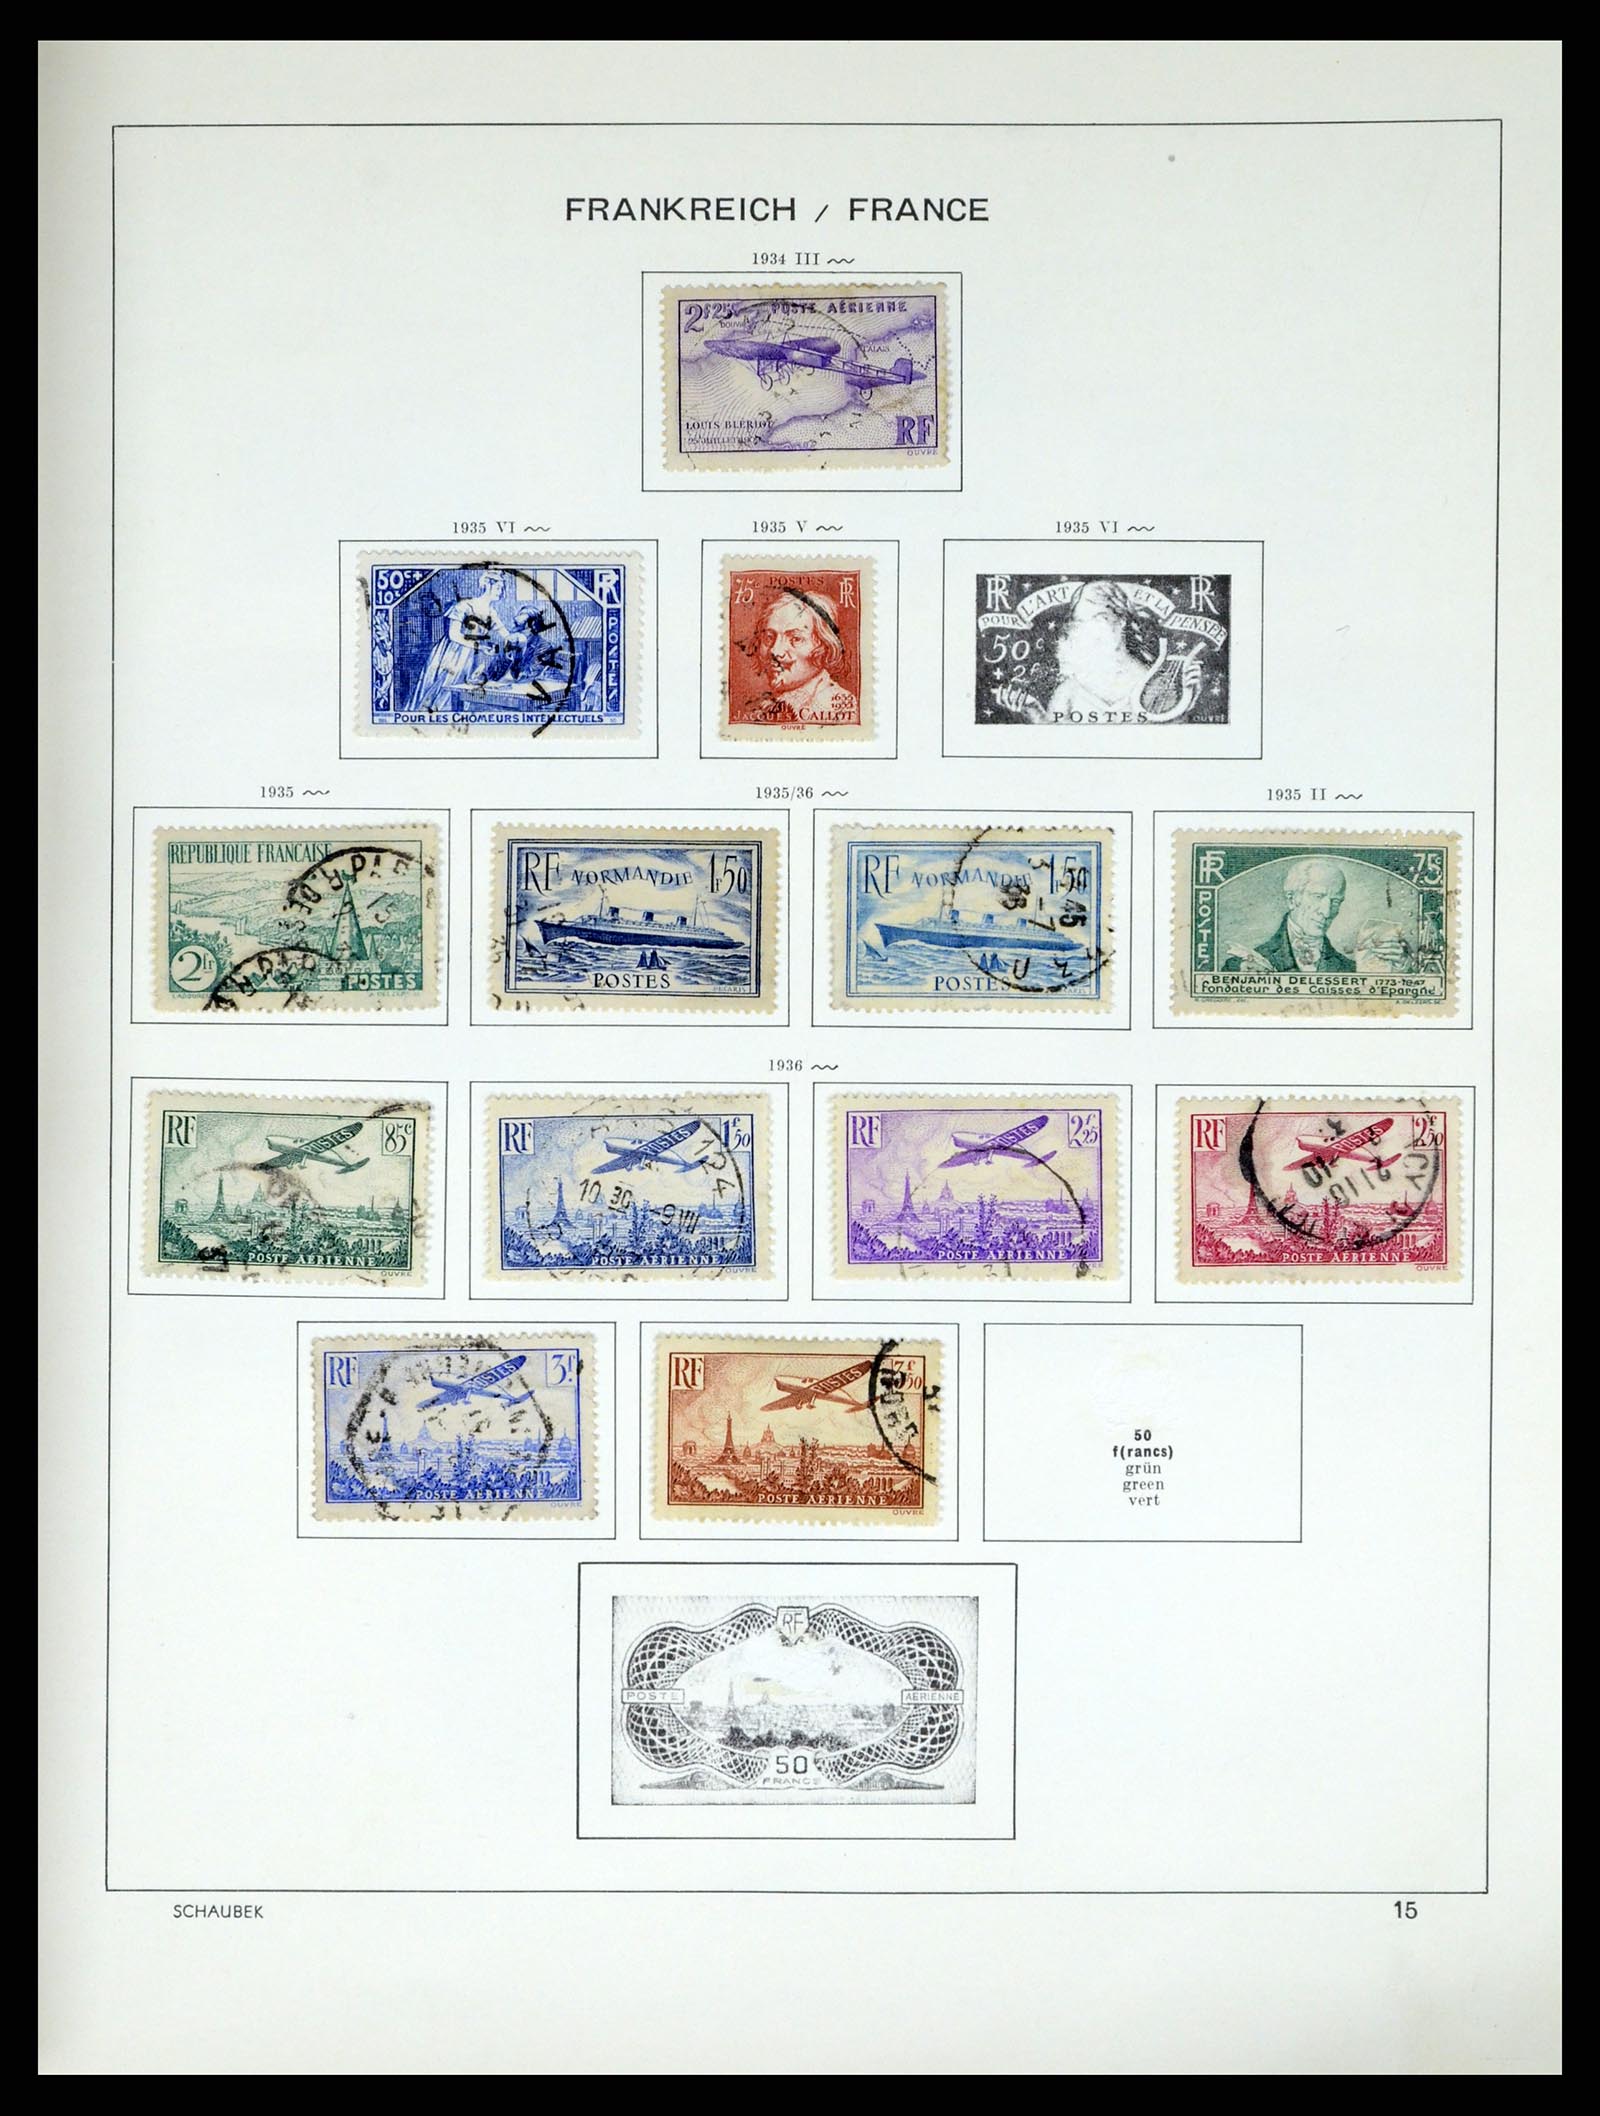 37355 032 - Stamp collection 37355 France 1849-1985.